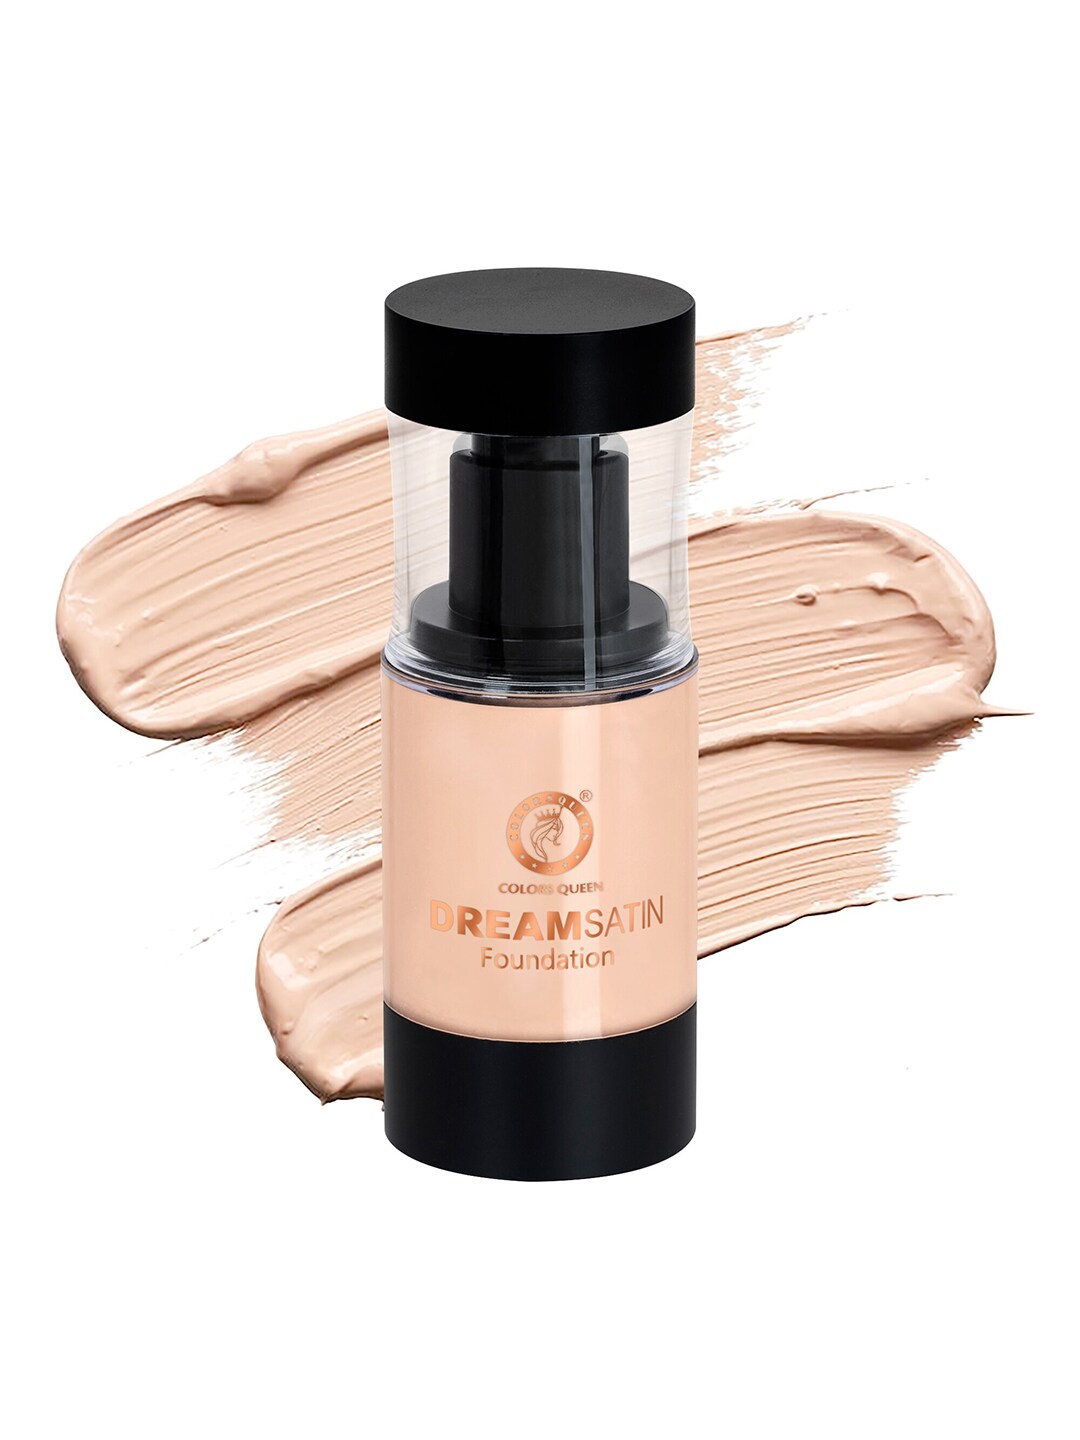 Colors Queen Dream Satin Oil Free Water Proof Foundation Price in India